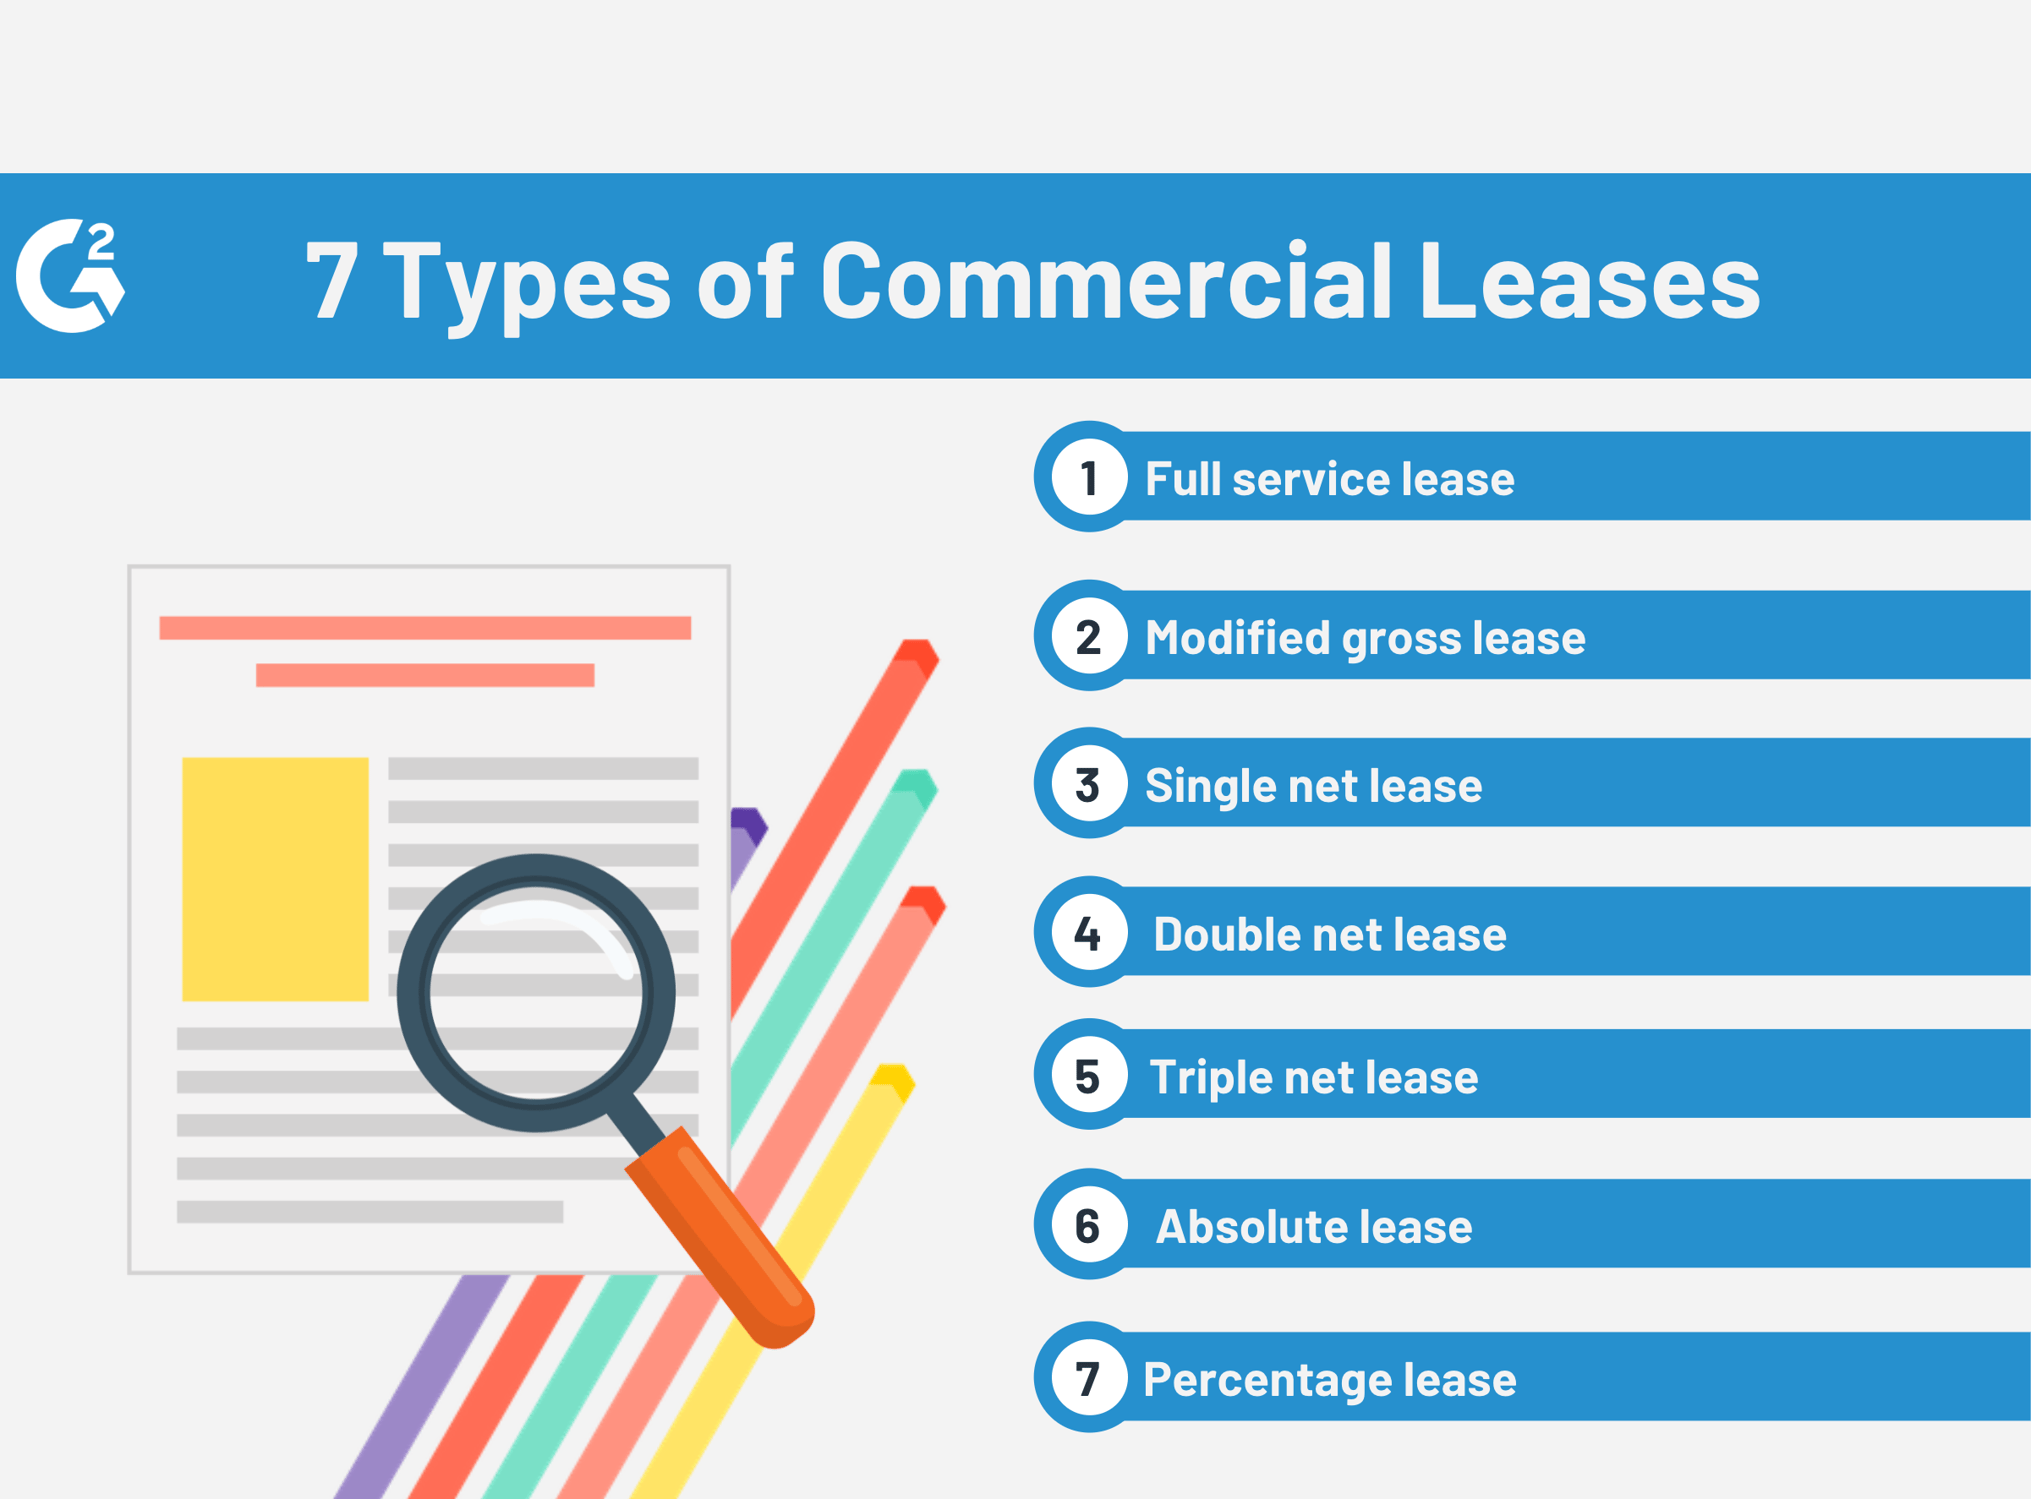 The 7 Types of Commercial Leases Explained